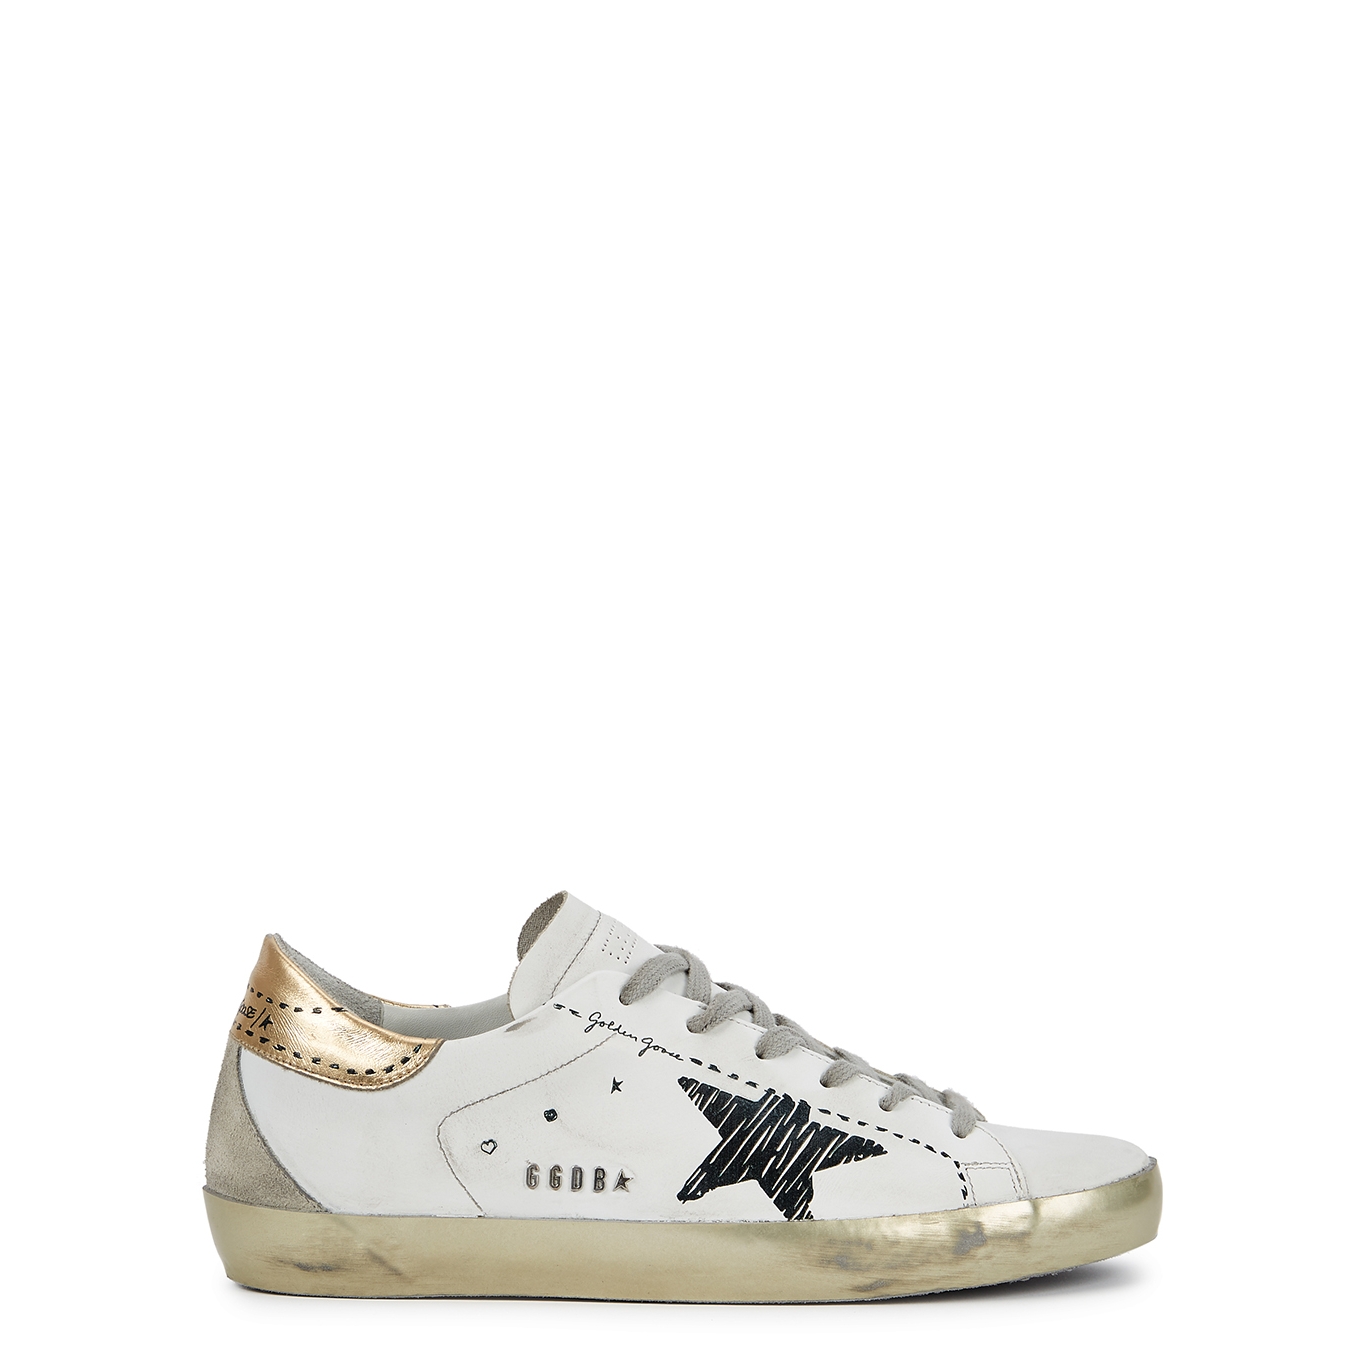 Golden Goose Superstar Distressed Leather Sneakers - White - 8